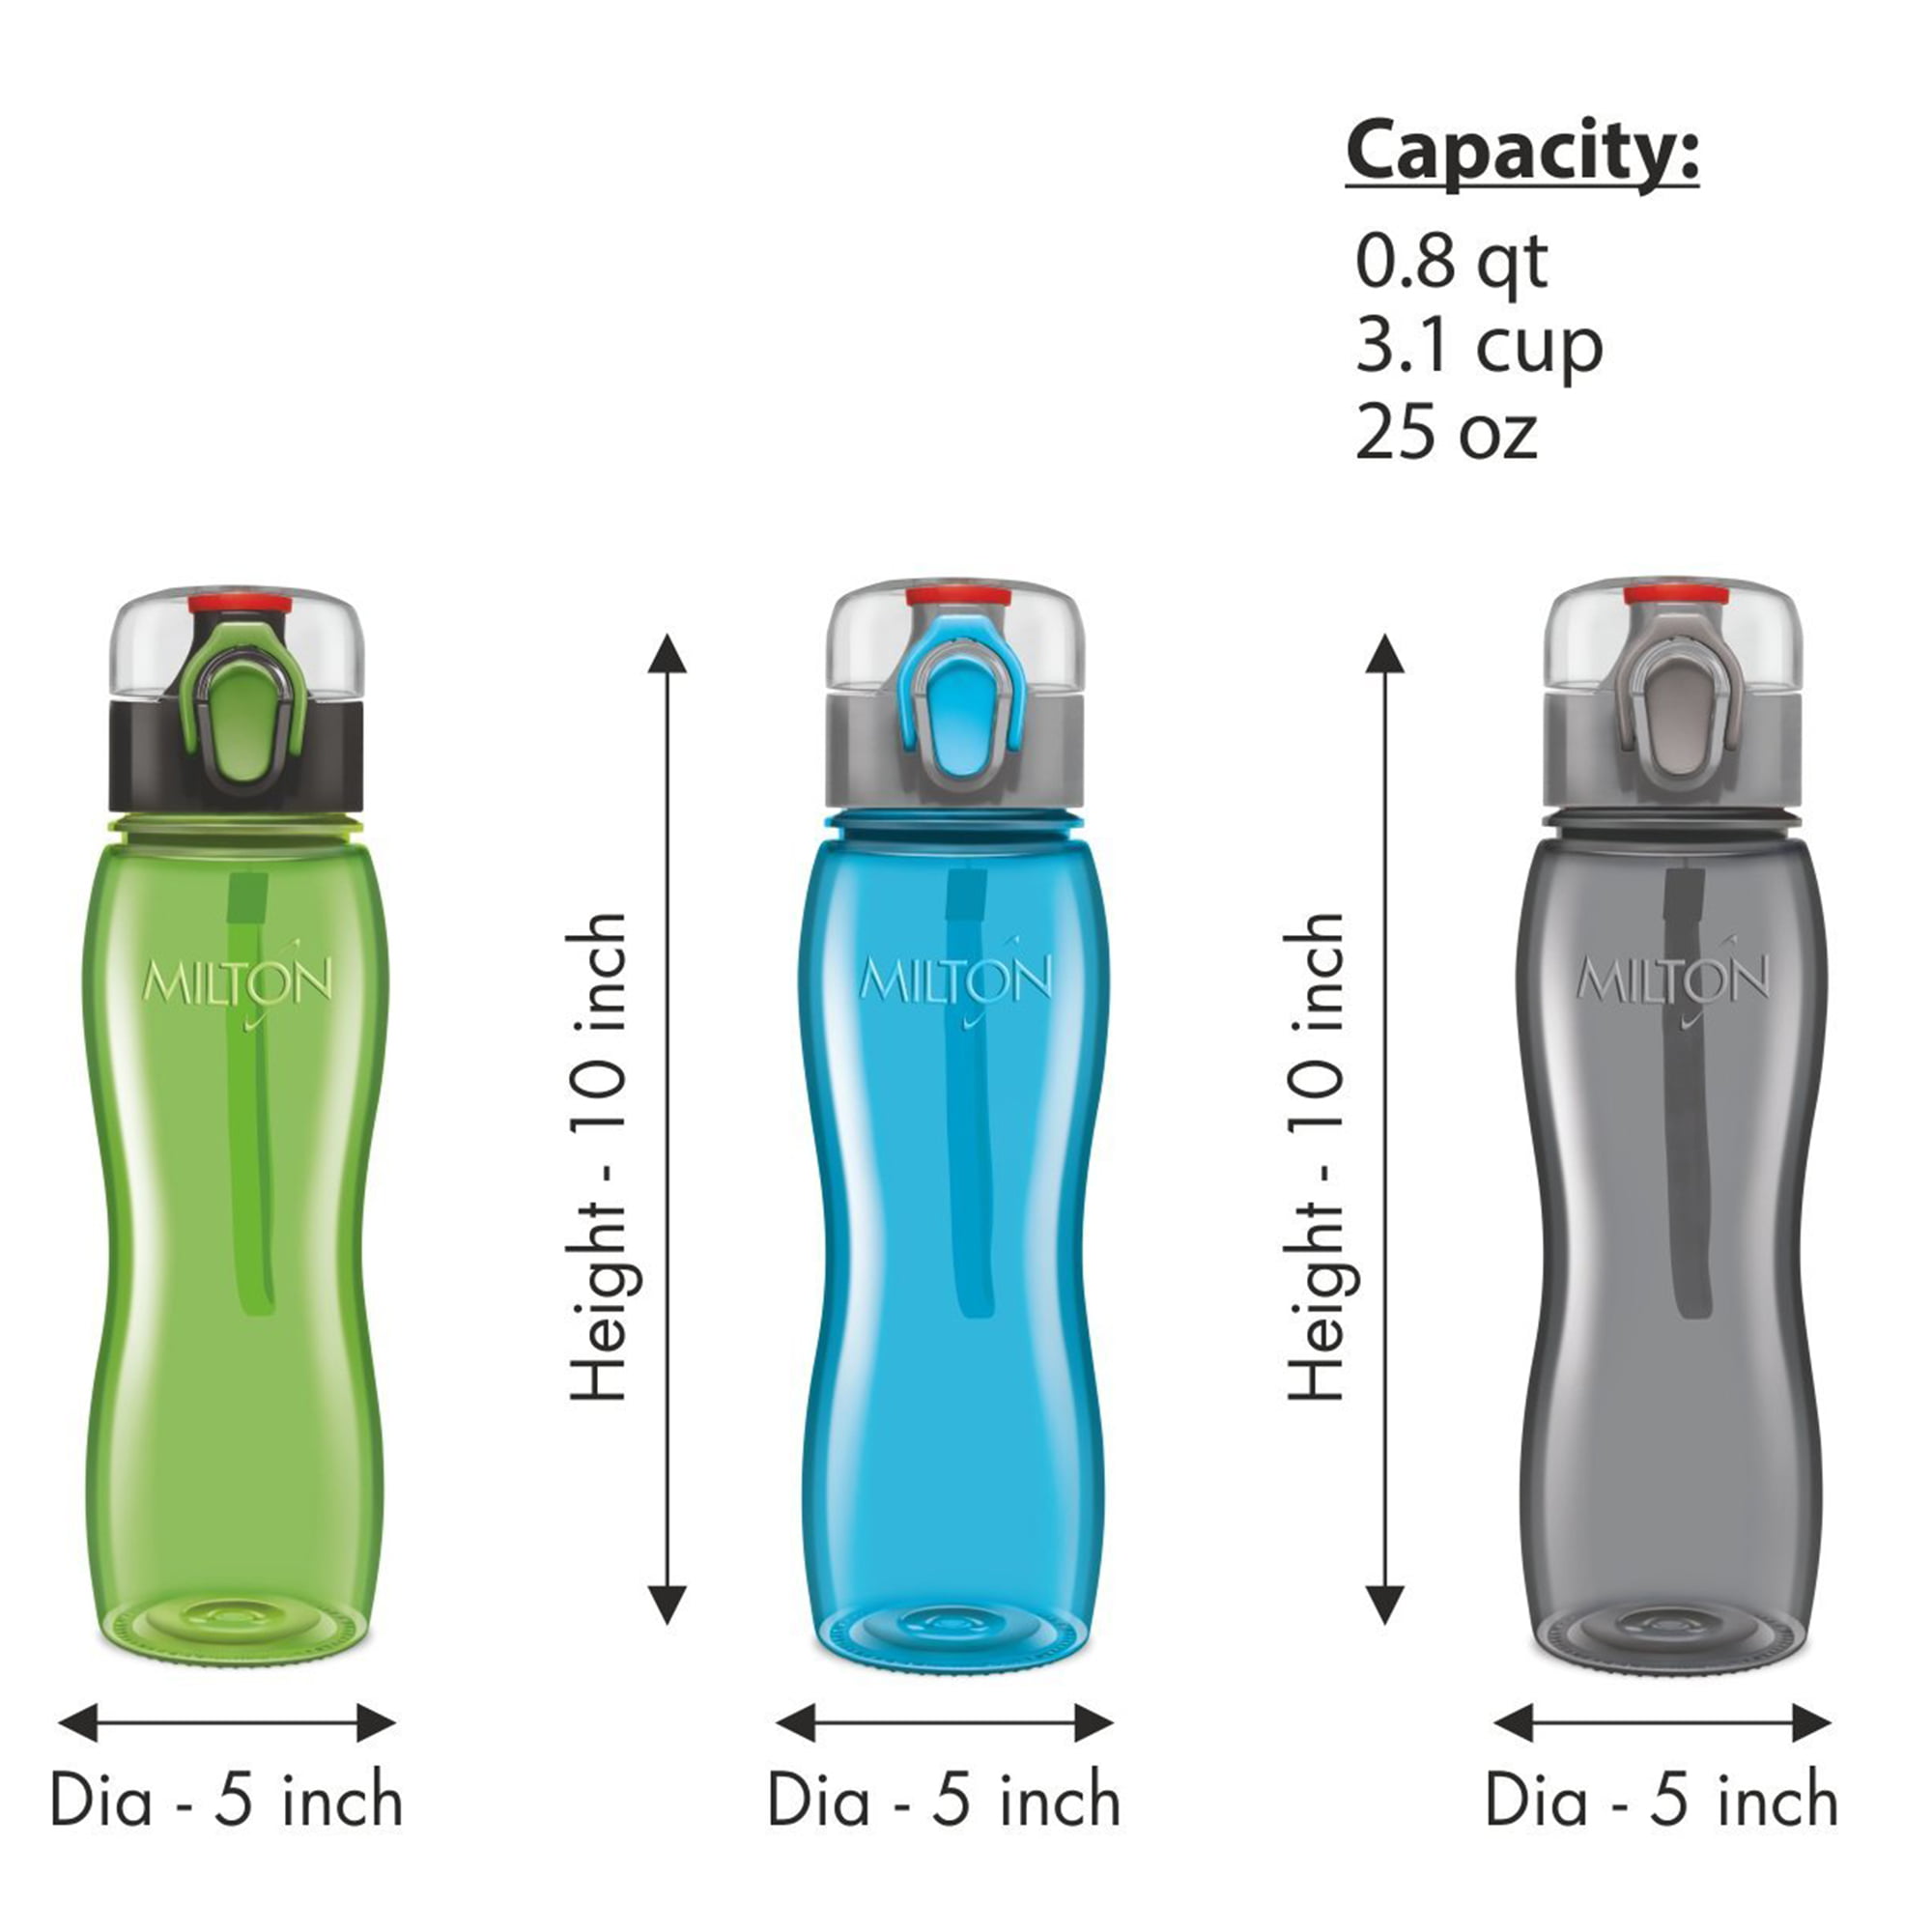  MILTON 8 pack 6 oz Kids Water Bottle for School Leak Free Flip  Lid- Portable Small Sports Water Bottle for Adults Carry Strap Party Favors  for Kids Treats Prizes Gifts Goodie